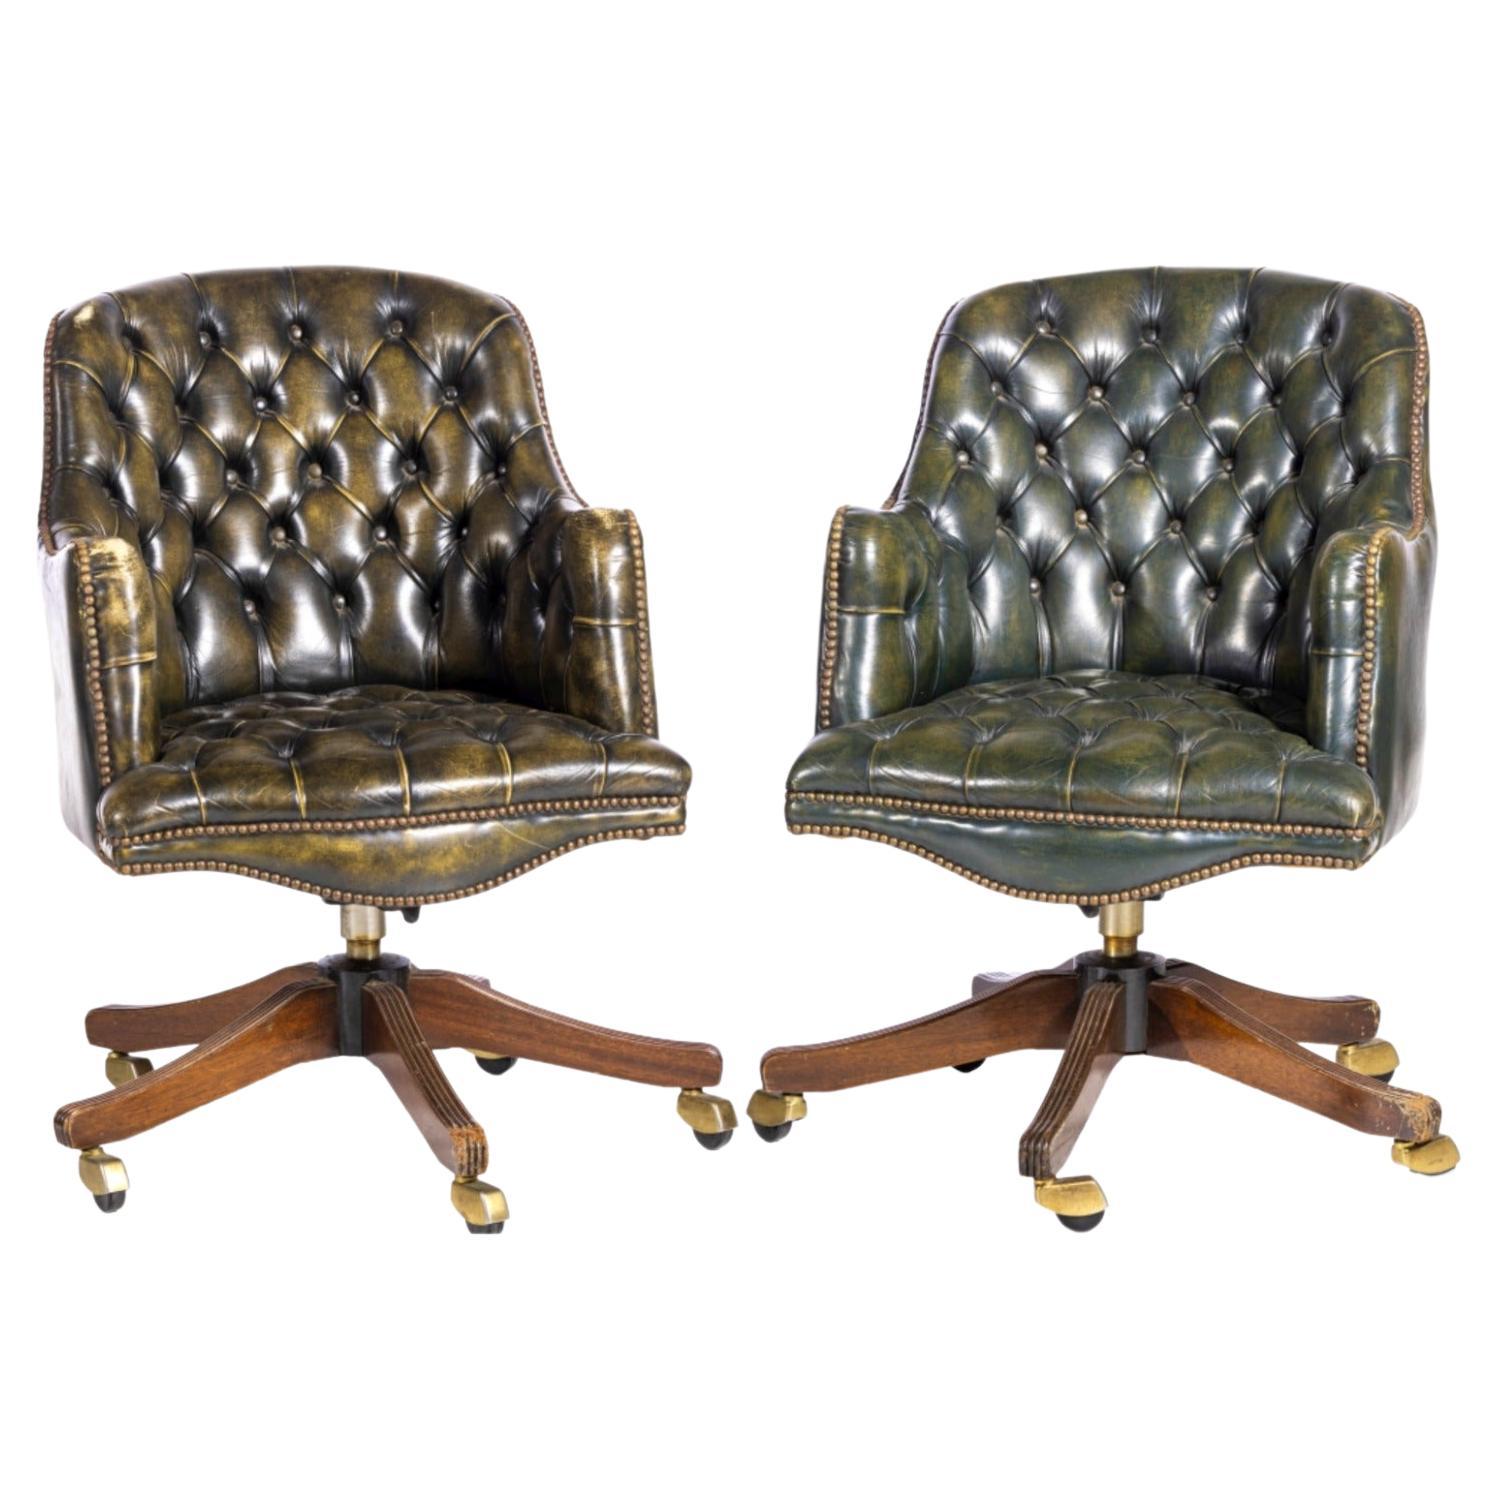 Pair of English Swiveling Desk Chairs Early 20th Century